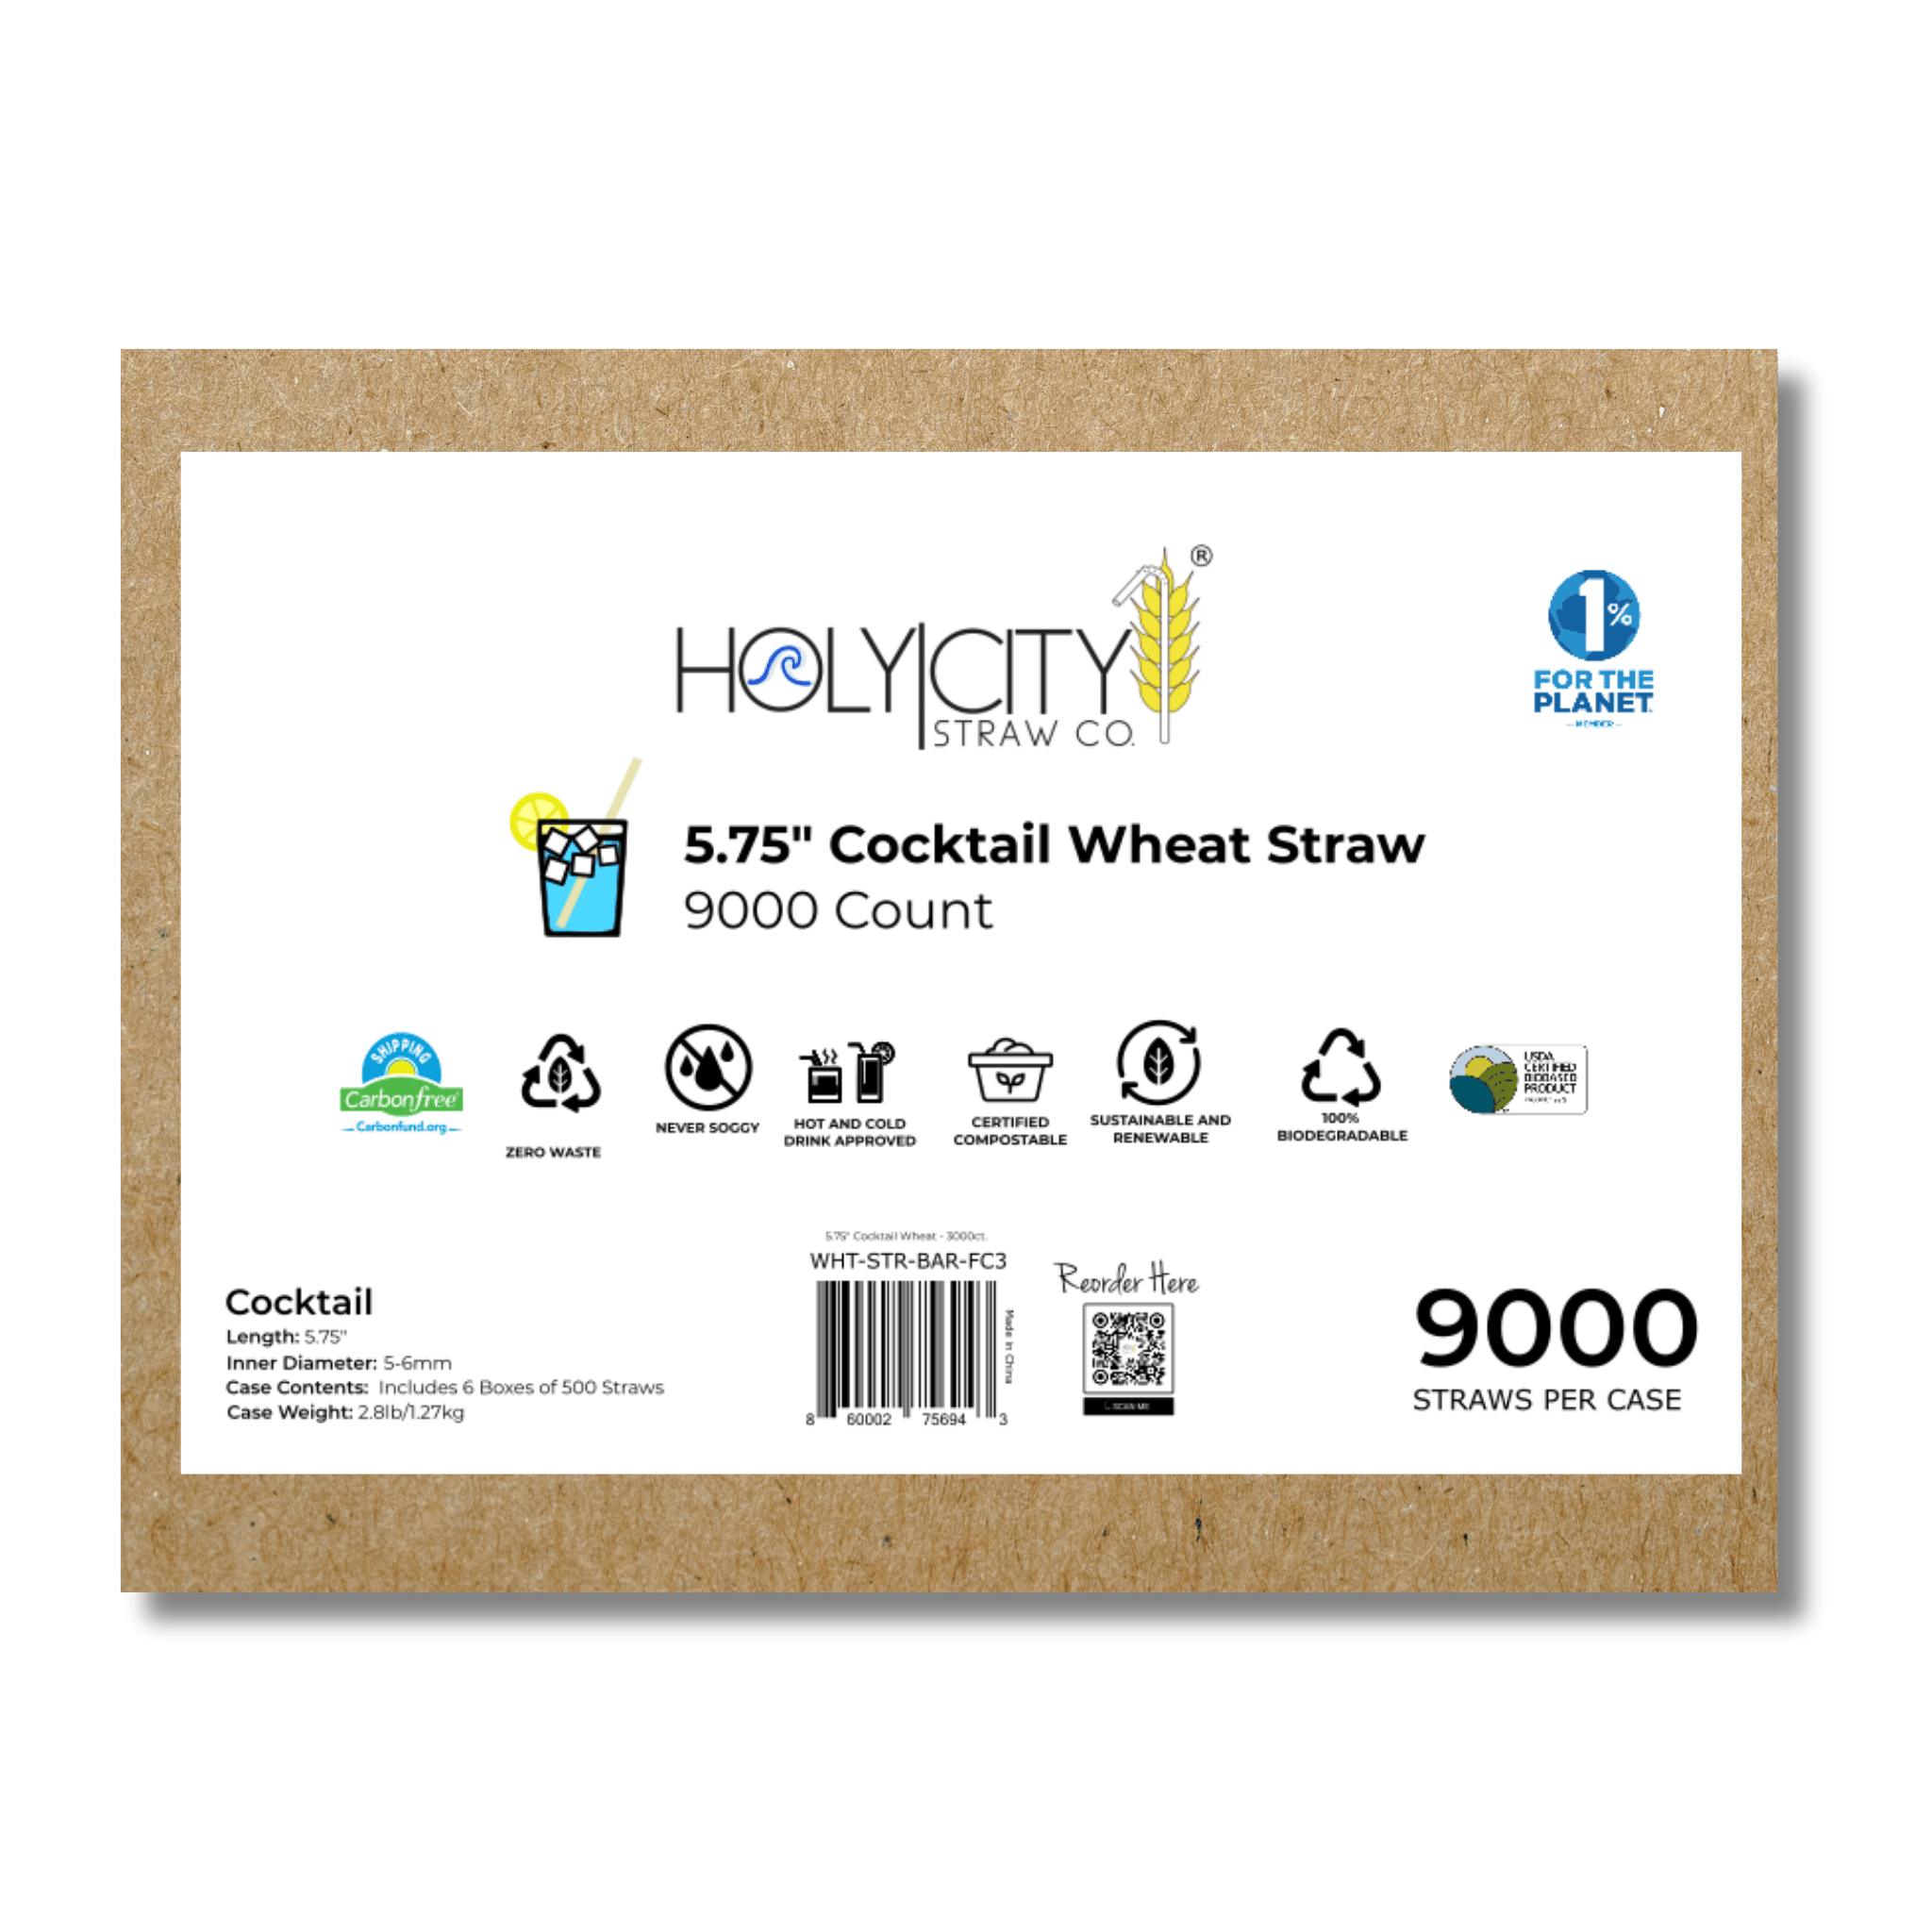 HolyCityStrawCompany 5.75-inch Wheat Cocktail Straws box of 9000 straws featuring eco-friendly attributes and product specifications